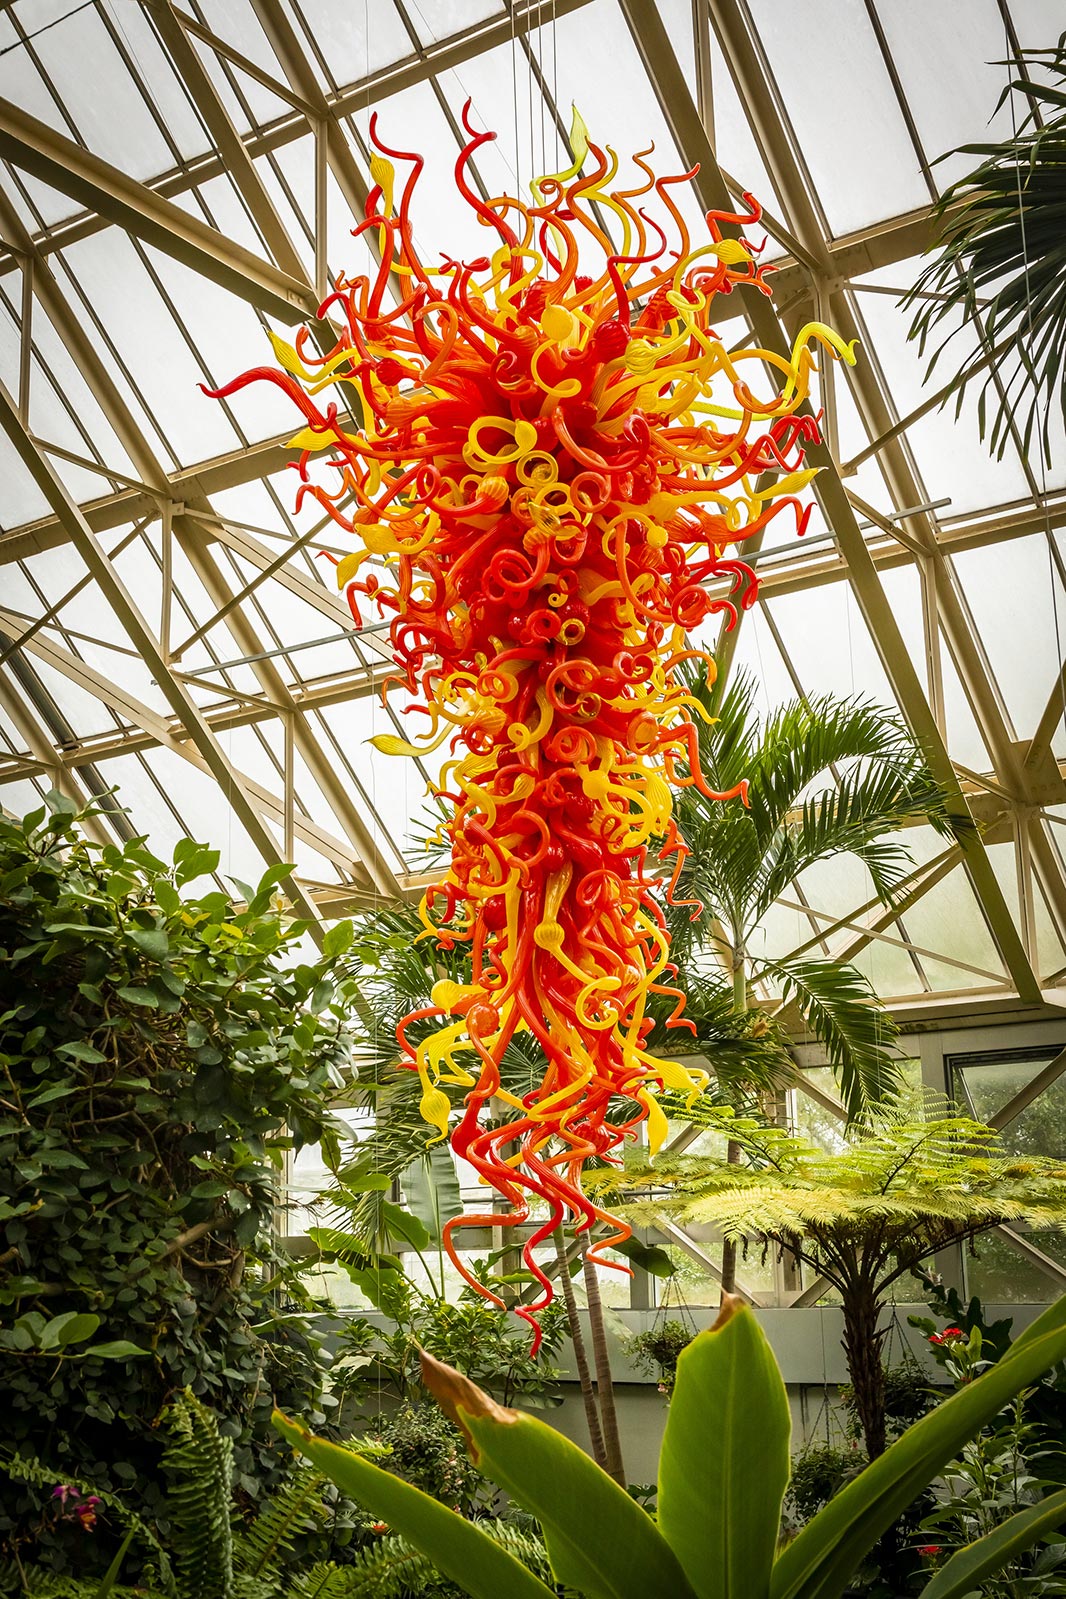 Sunset Chandelier (2019) by Dale Chihuly